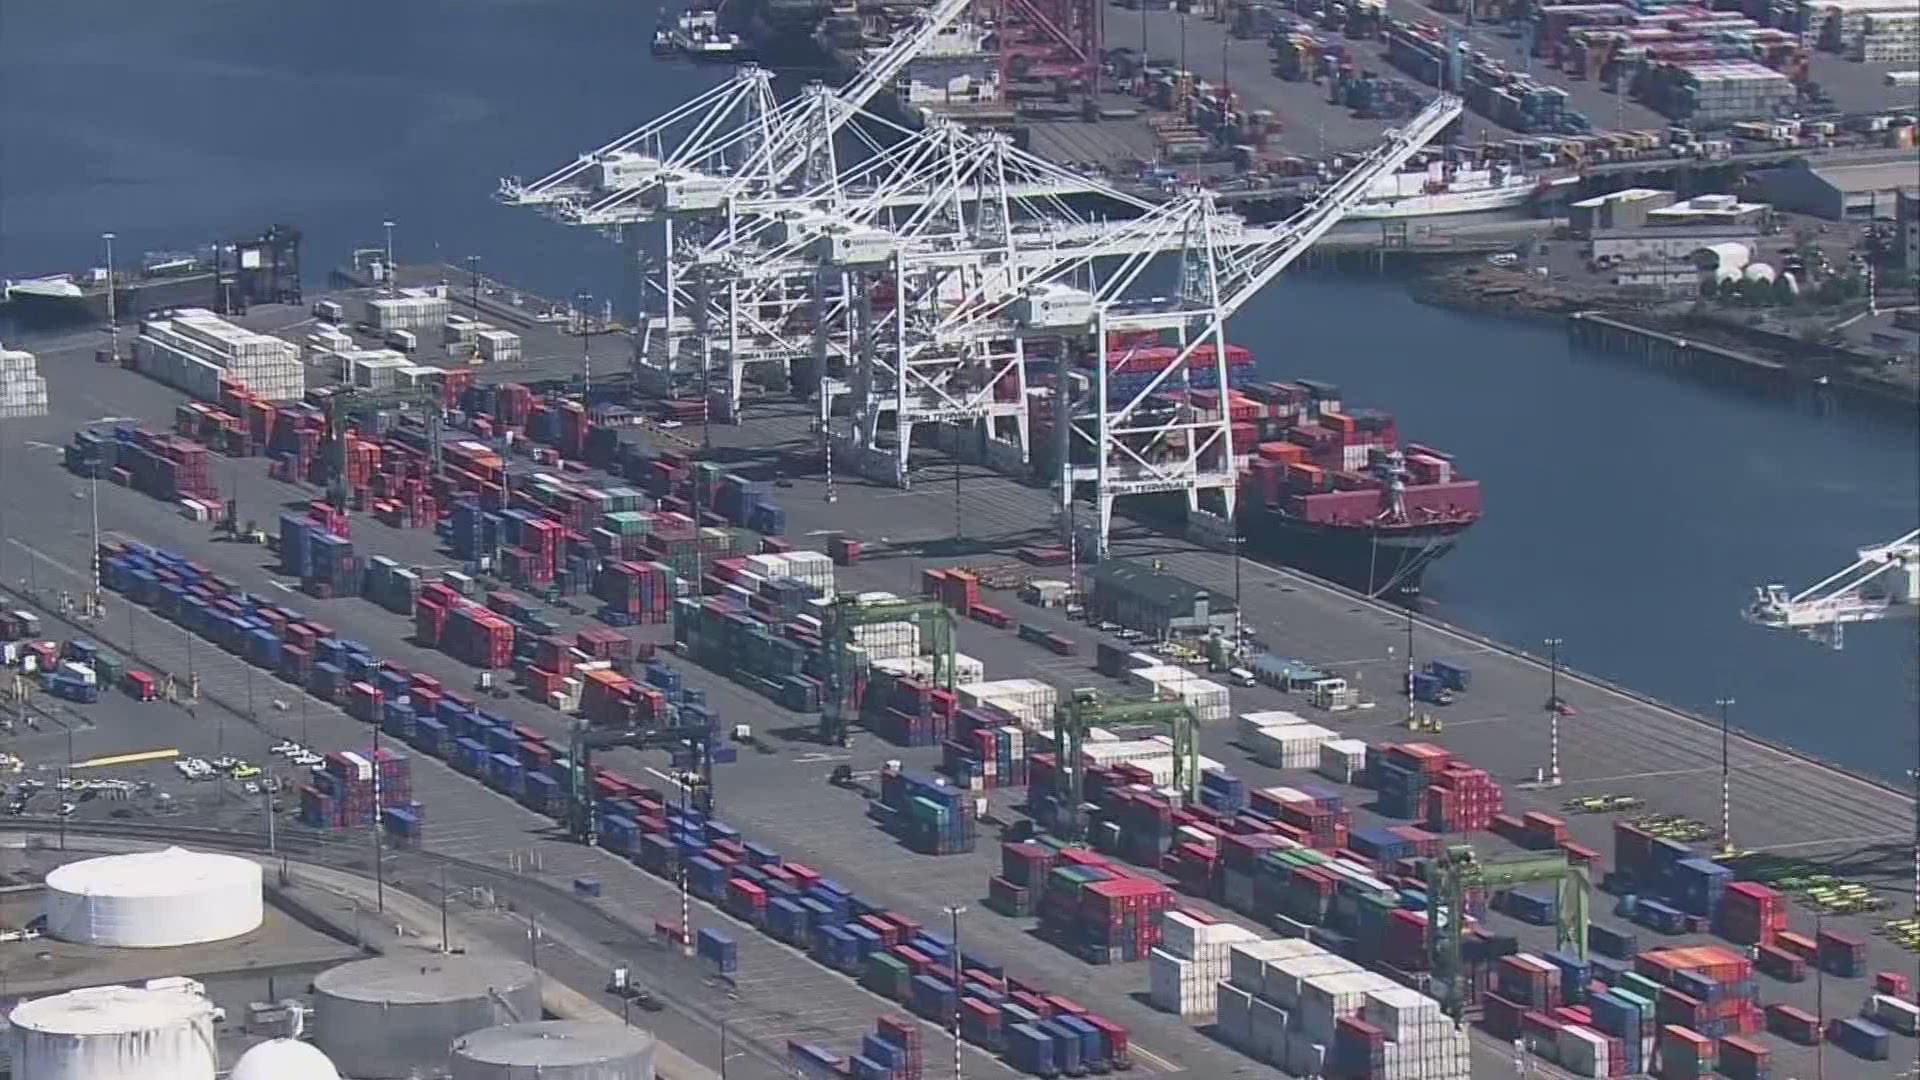 The Northwest Seaport Alliance, which includes ports in Washington and Canada, committed to going green by 2050 at the latest in the face of the climate crisis.